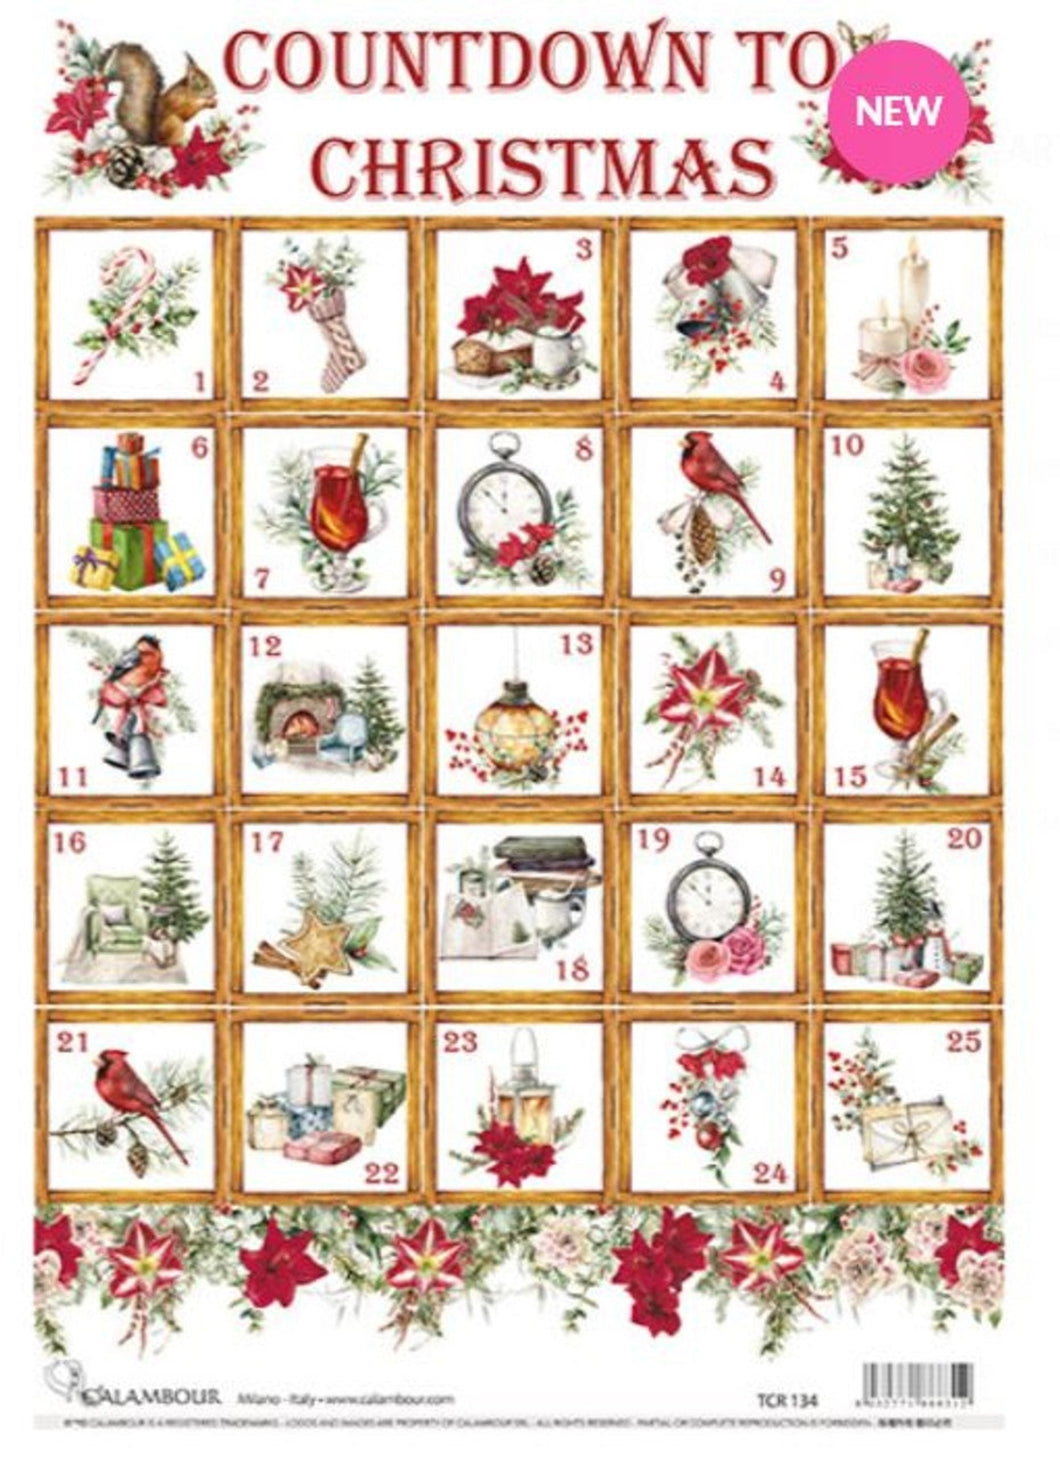 Christmas Advent Squares Rice Paper by Calambour, TCR134. A3